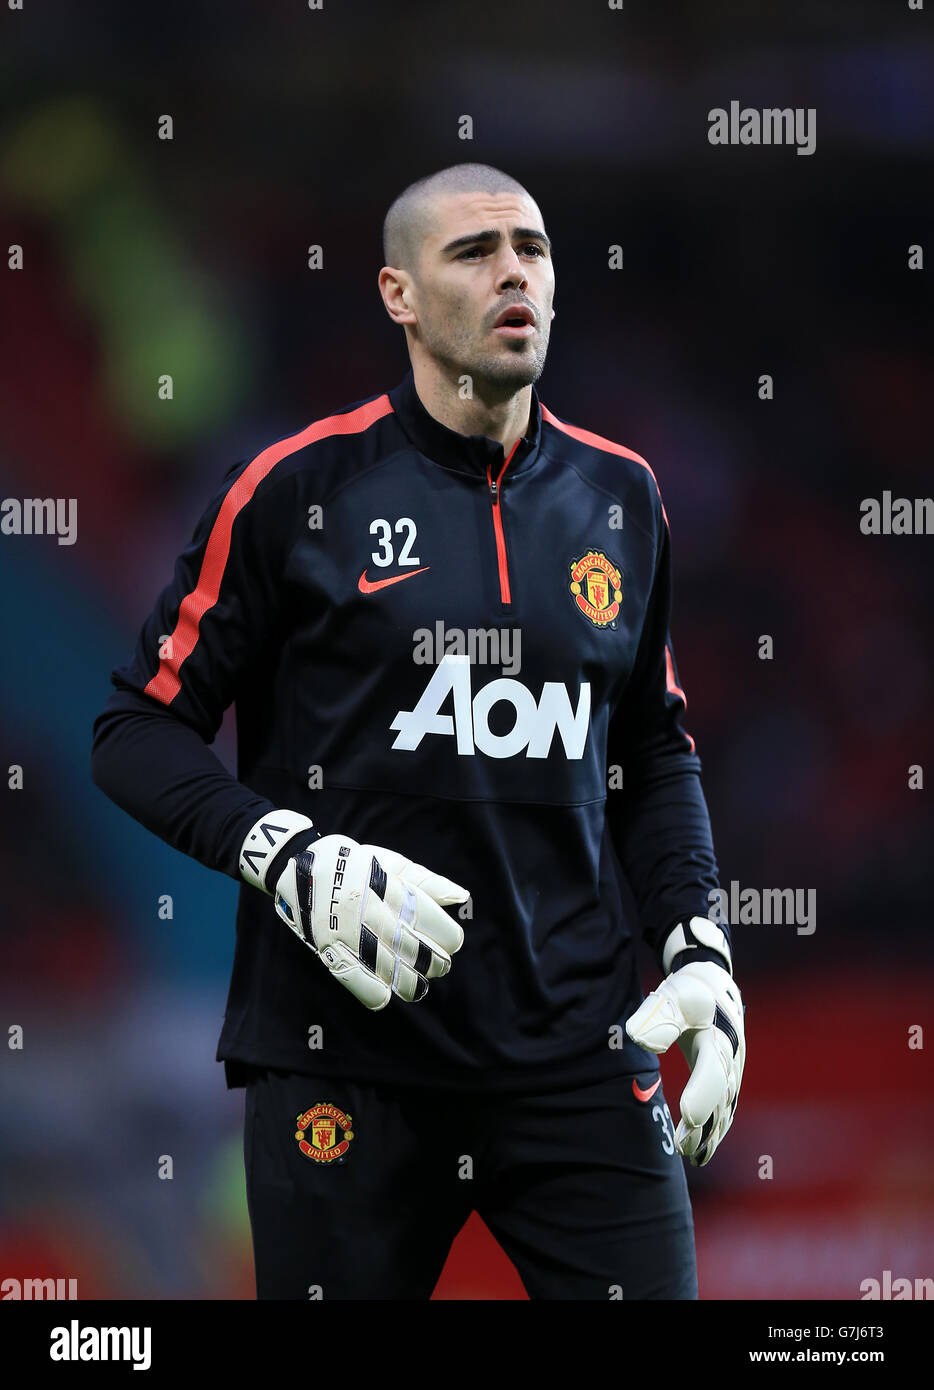 Soccer - Barclays Premier League - Manchester United v Southampton - Old Trafford. Manchester United Goalkeeper Victor Valdes. Stock Photo